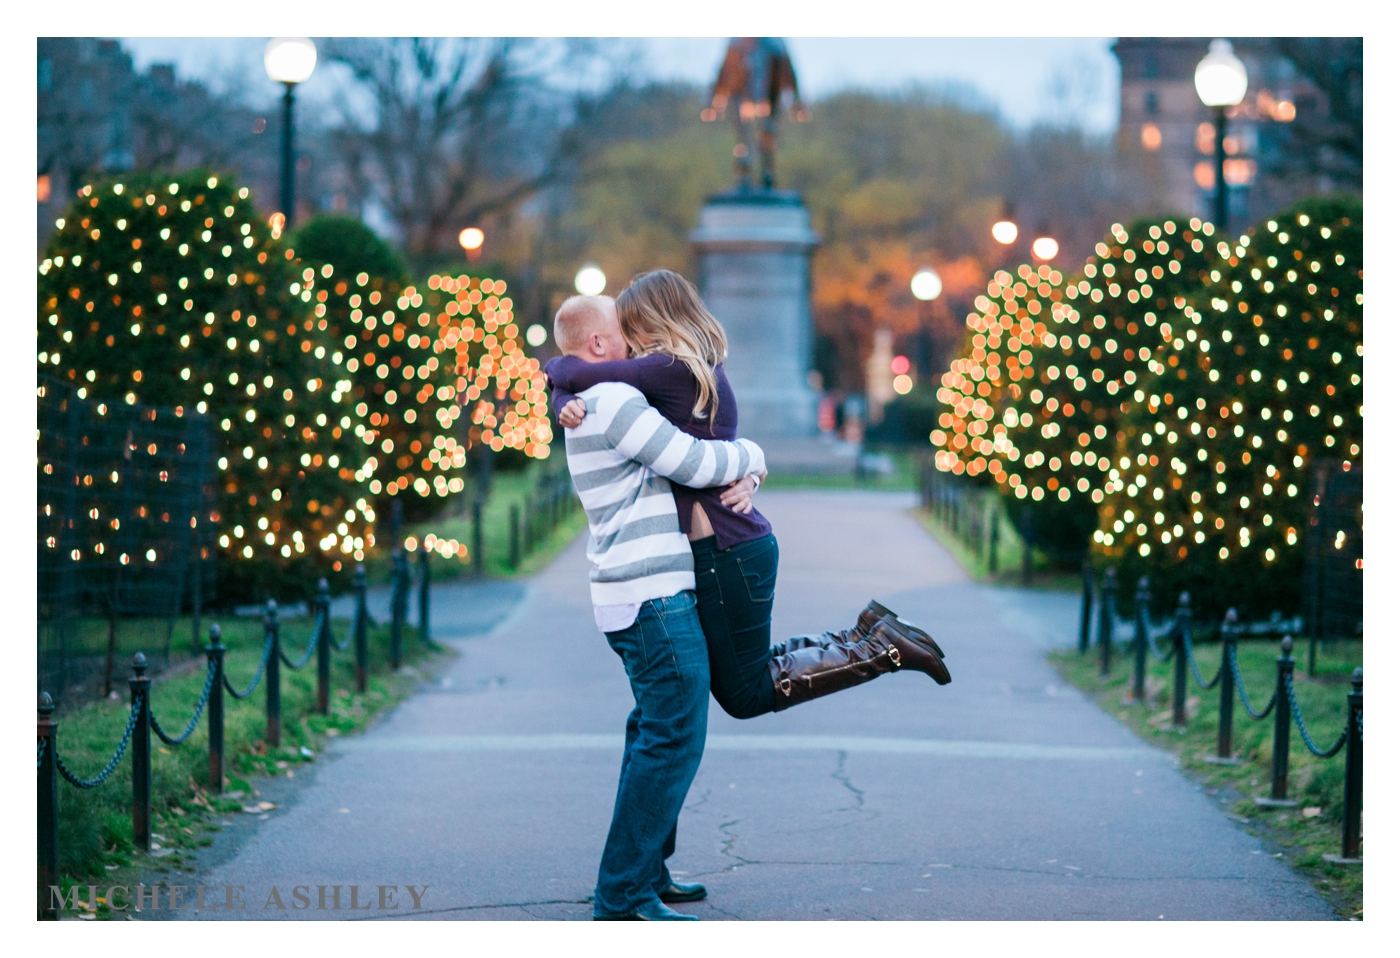 Boston Common and Beacon Hill Engagement Photographer